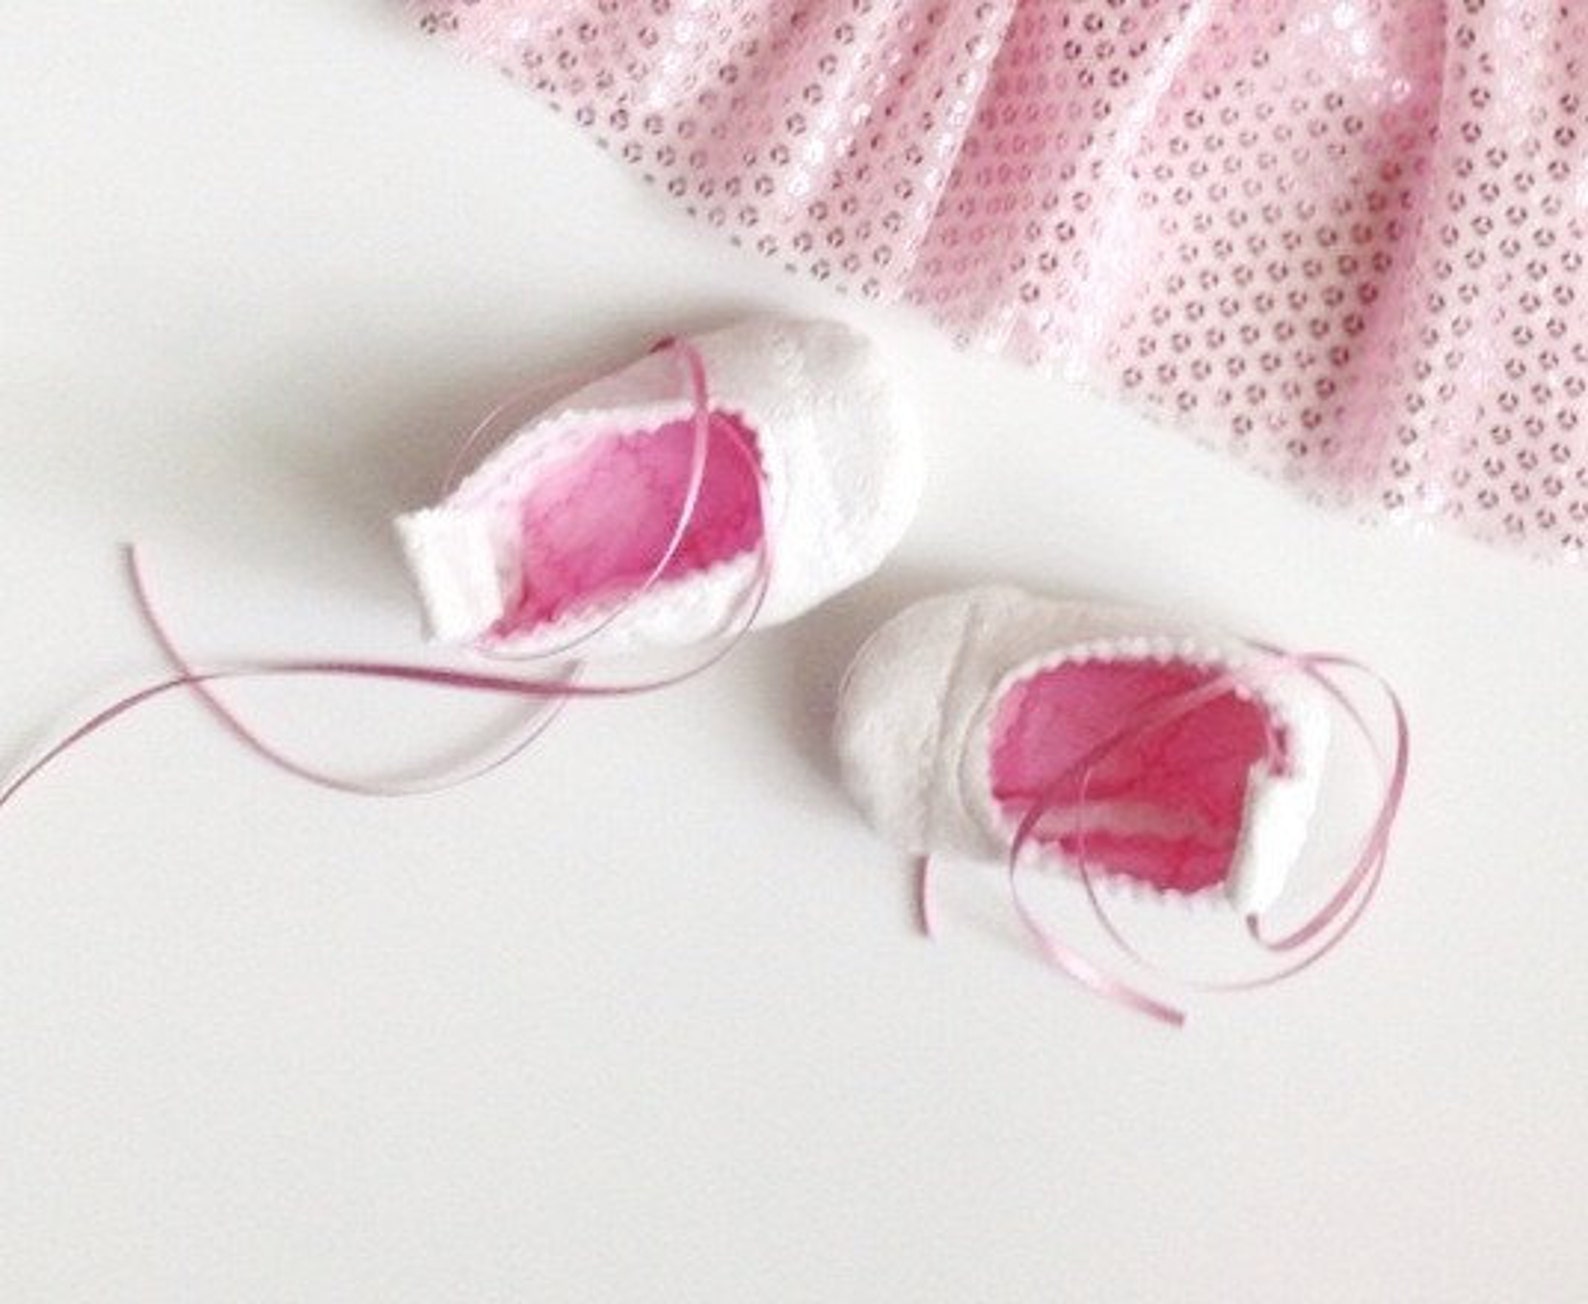 white sparkly baby ballerina slippers with pink sparkly lining, tie up the legs like real ballet flats, great baby gift!